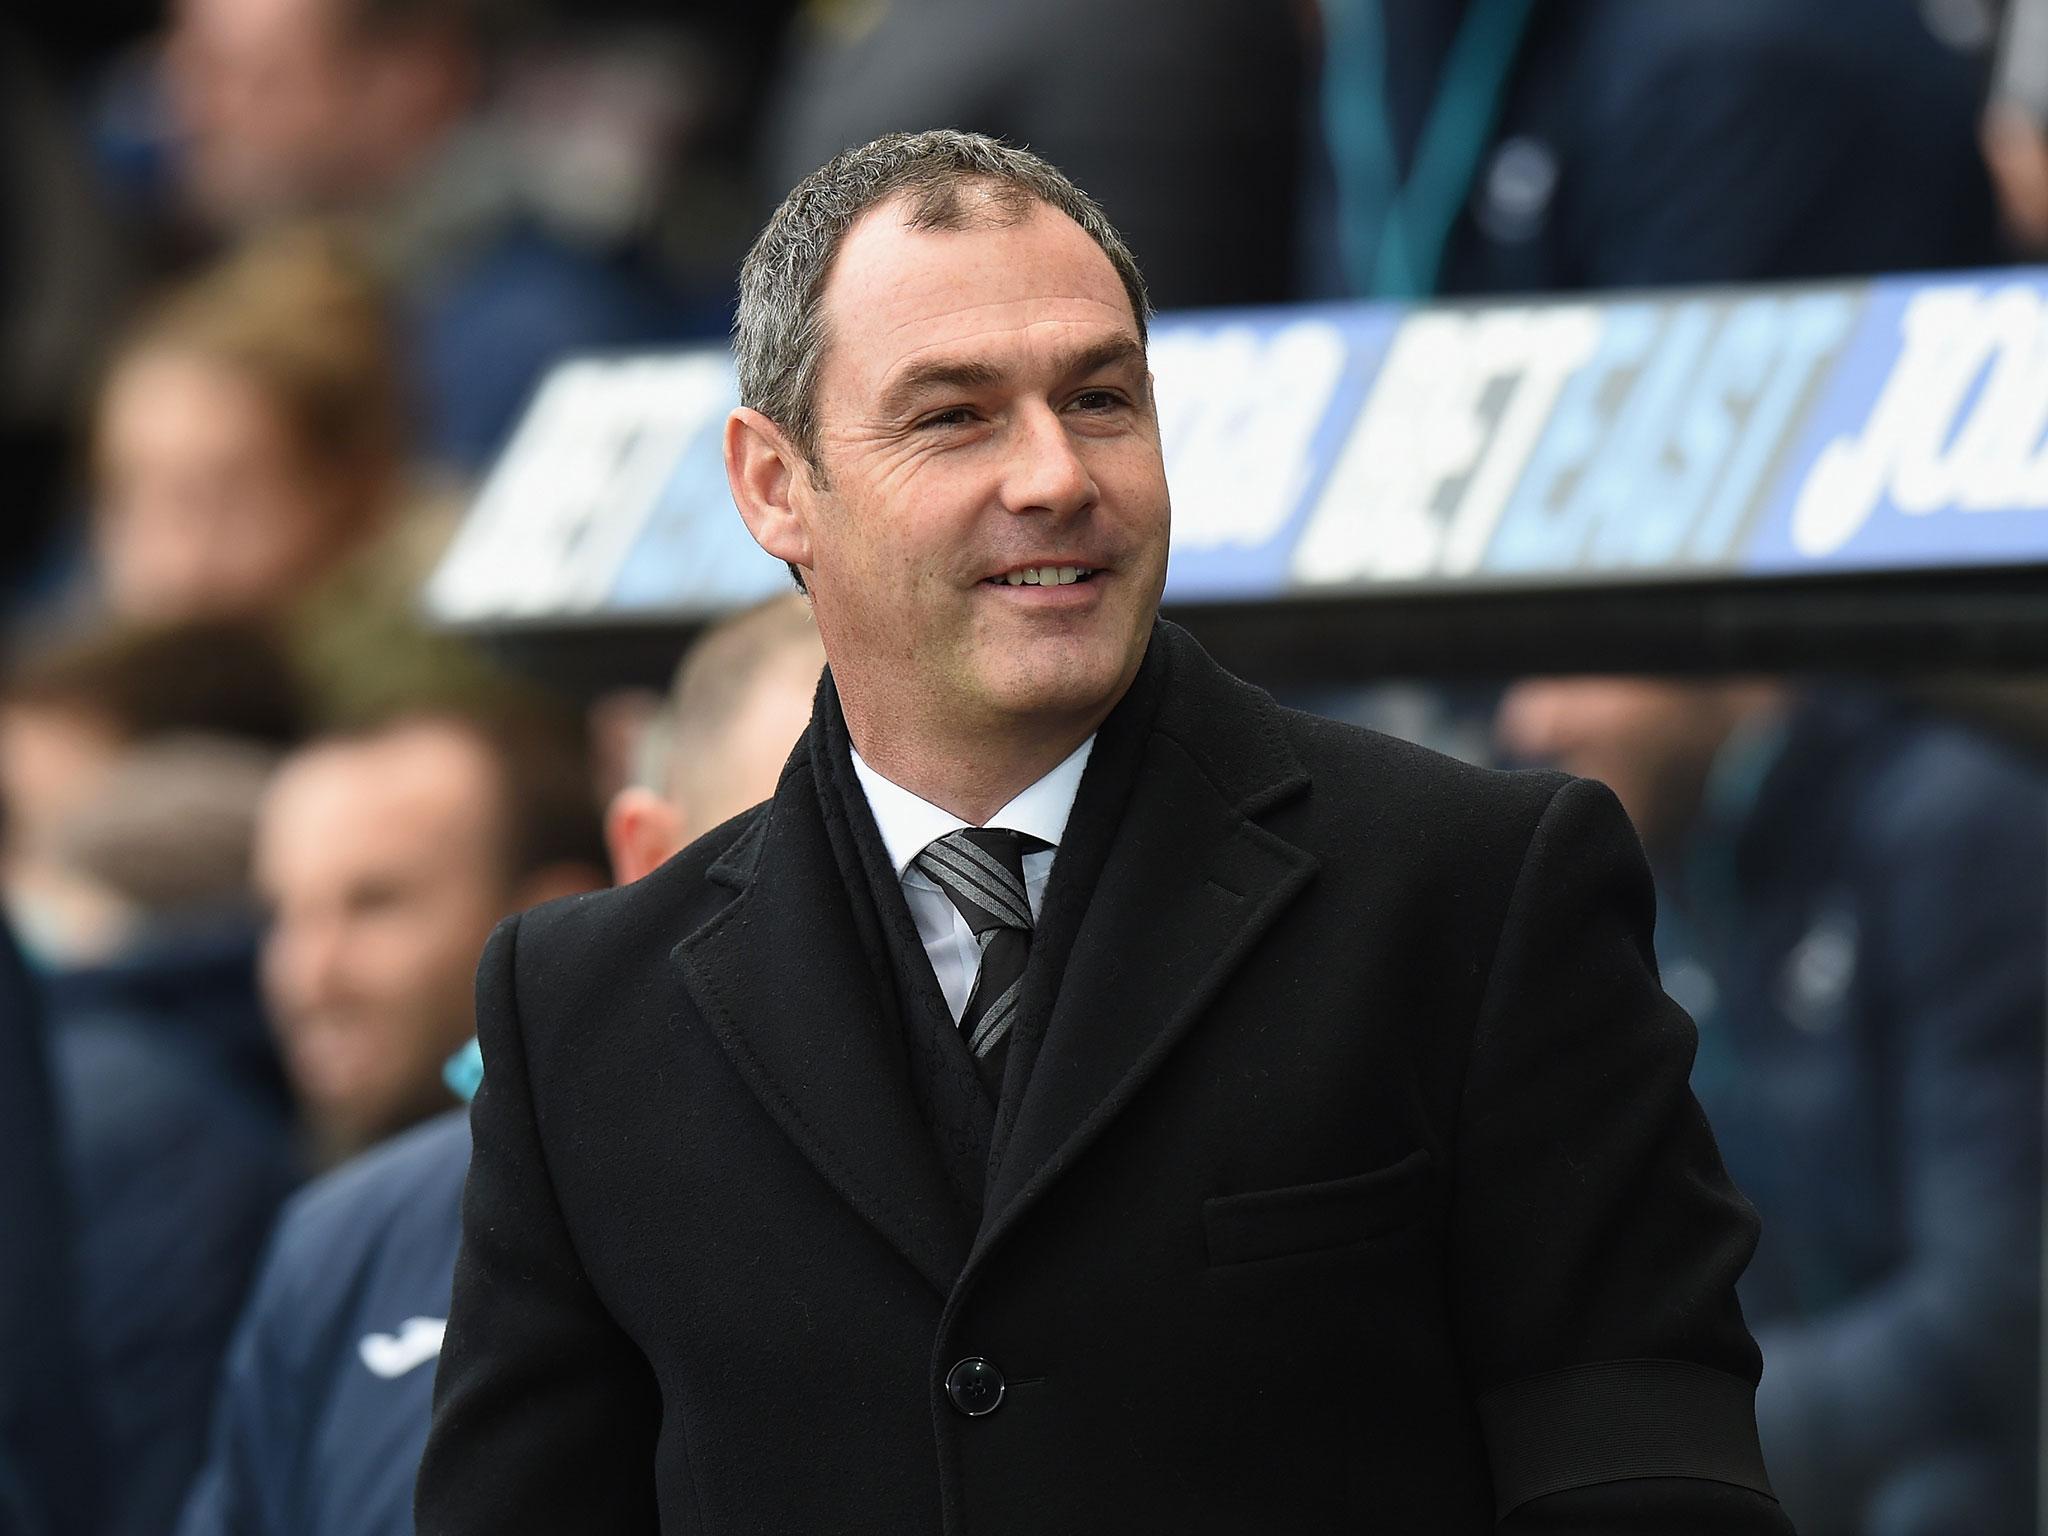 Clement was pleased with the result but did admit some things could have been done better